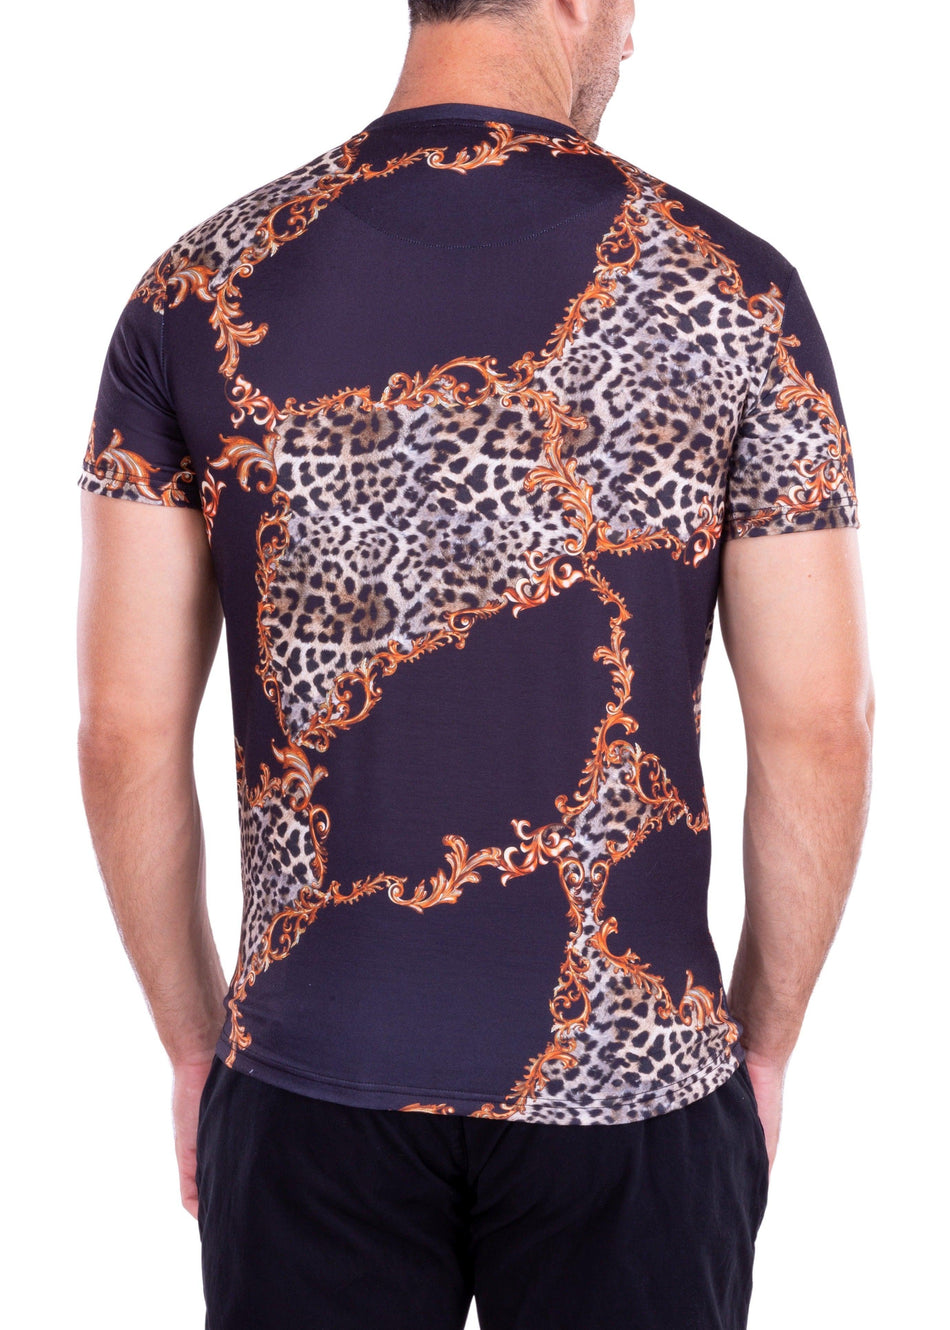 Cheetah Print Antique Motif Bold Printed All-Over Graphic Tee Black